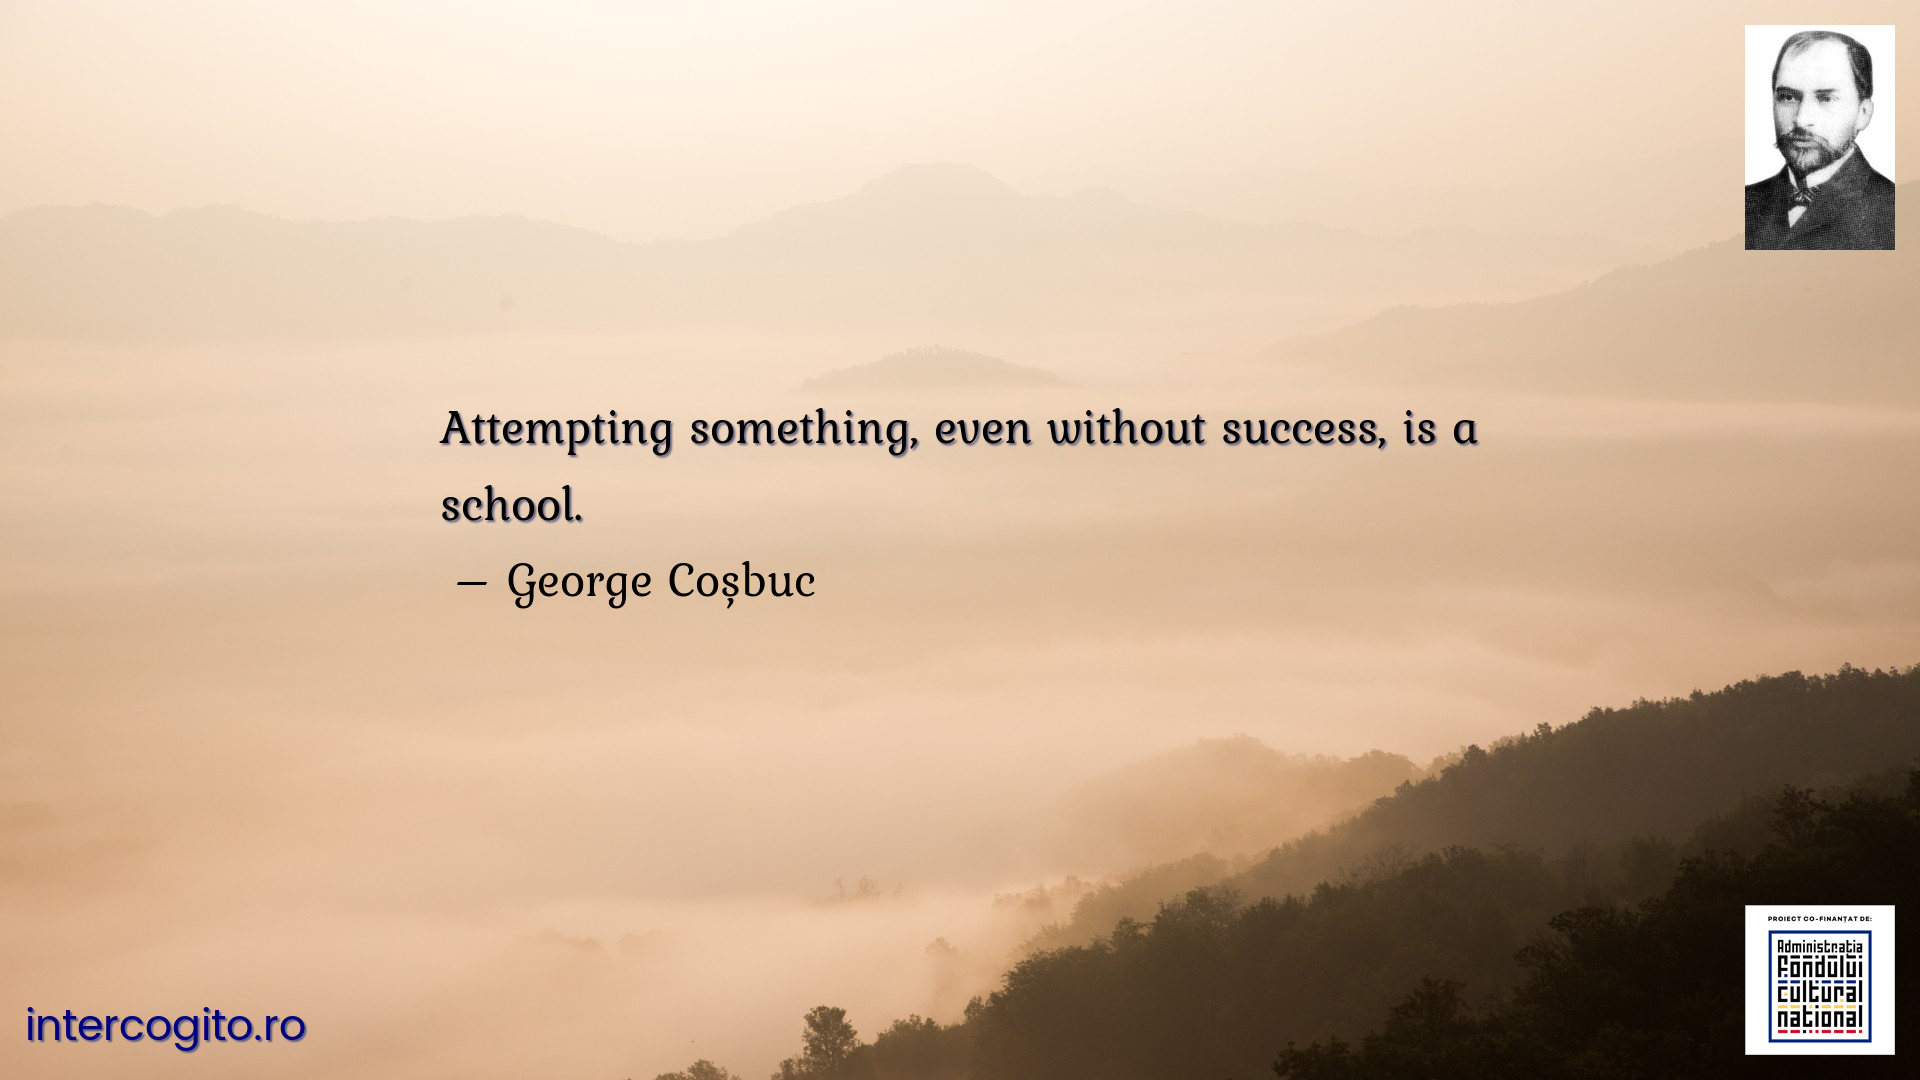 Attempting something, even without success, is a school.